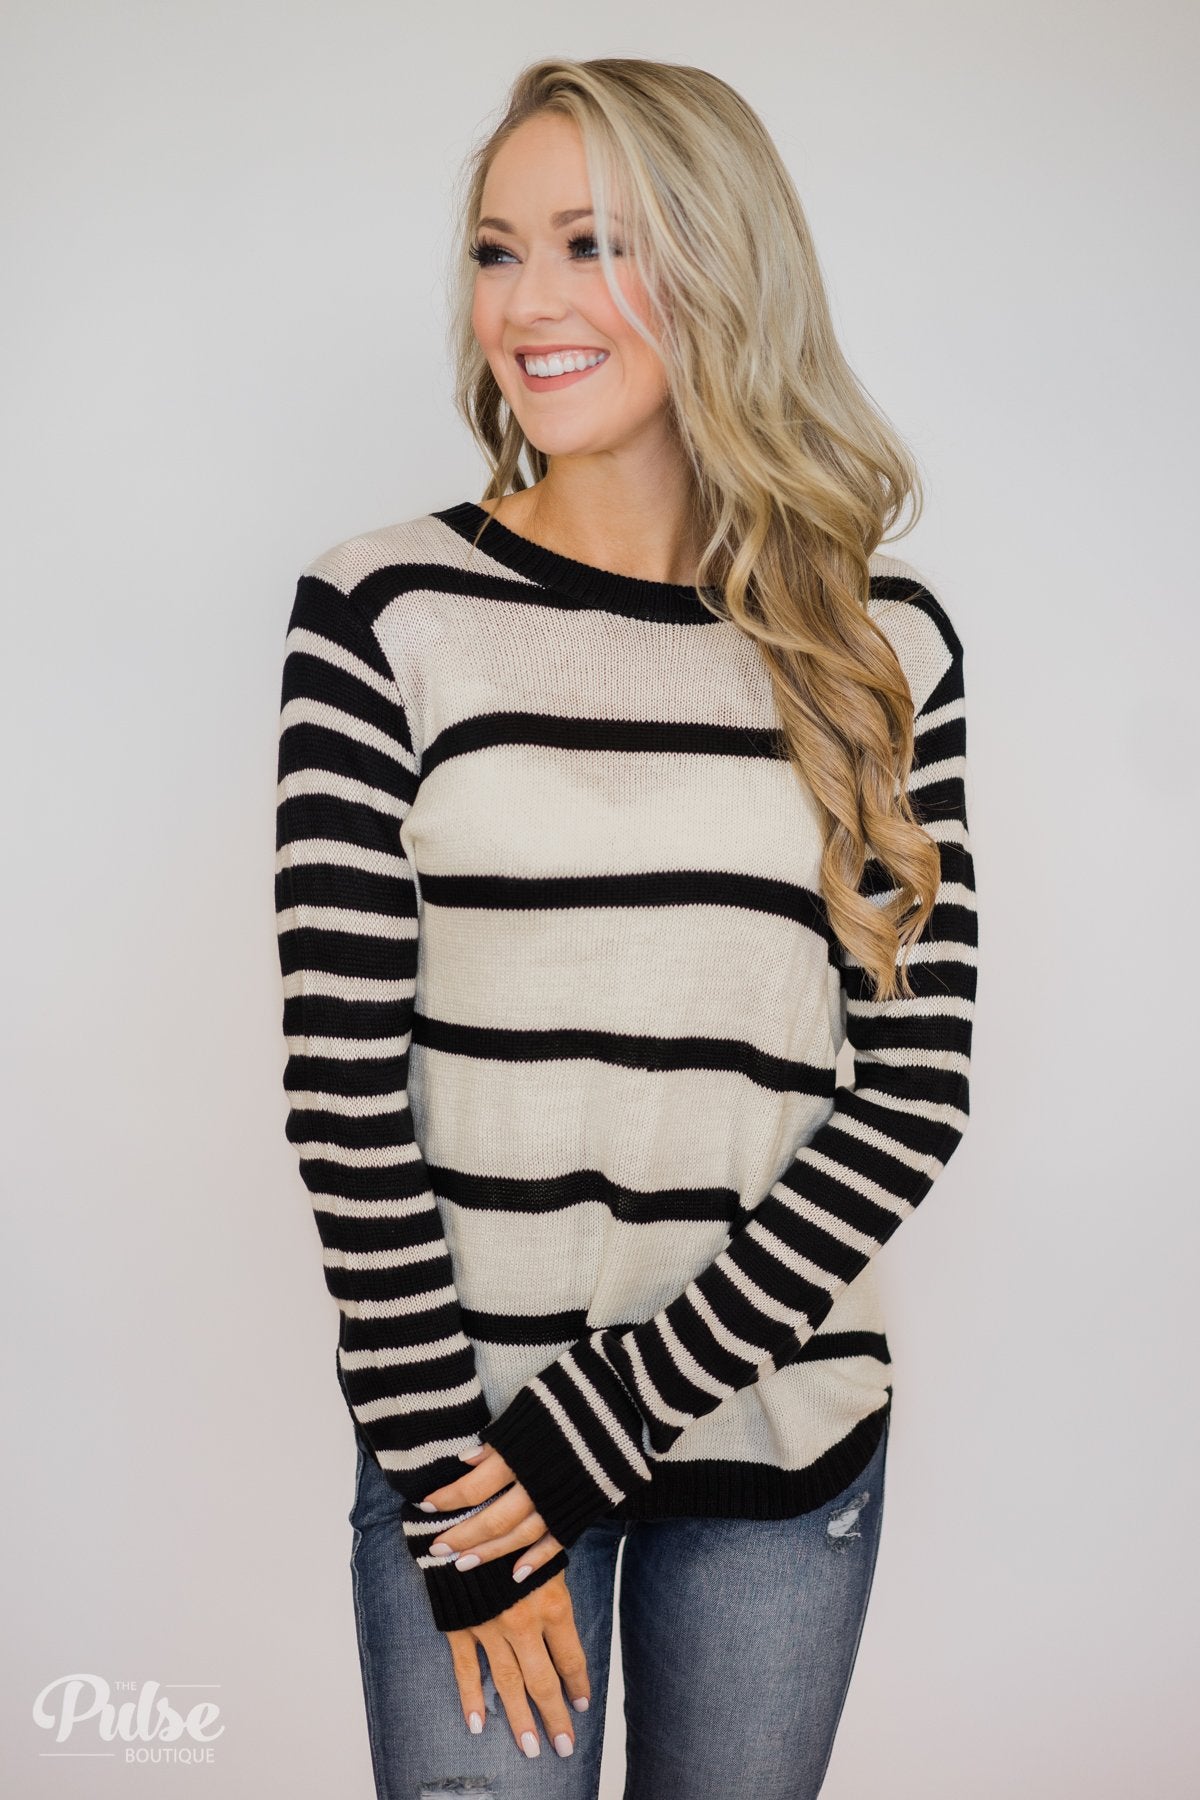 Good Things Coming Striped Knit Sweater- Black